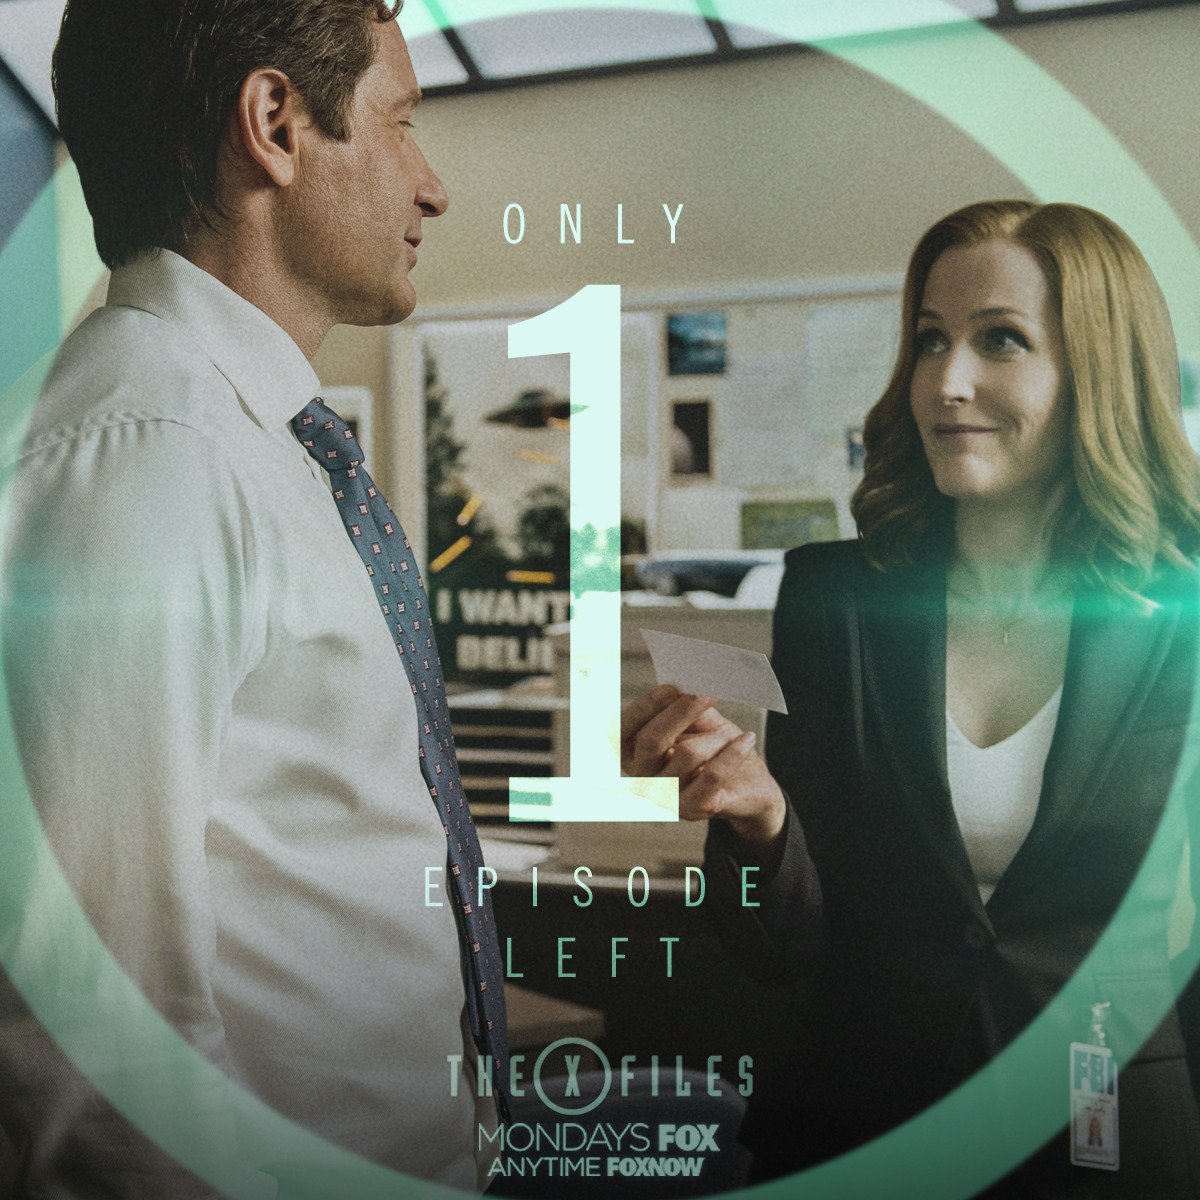 Monday night! #TheXFiles https://t.co/Taf6LuvcDv